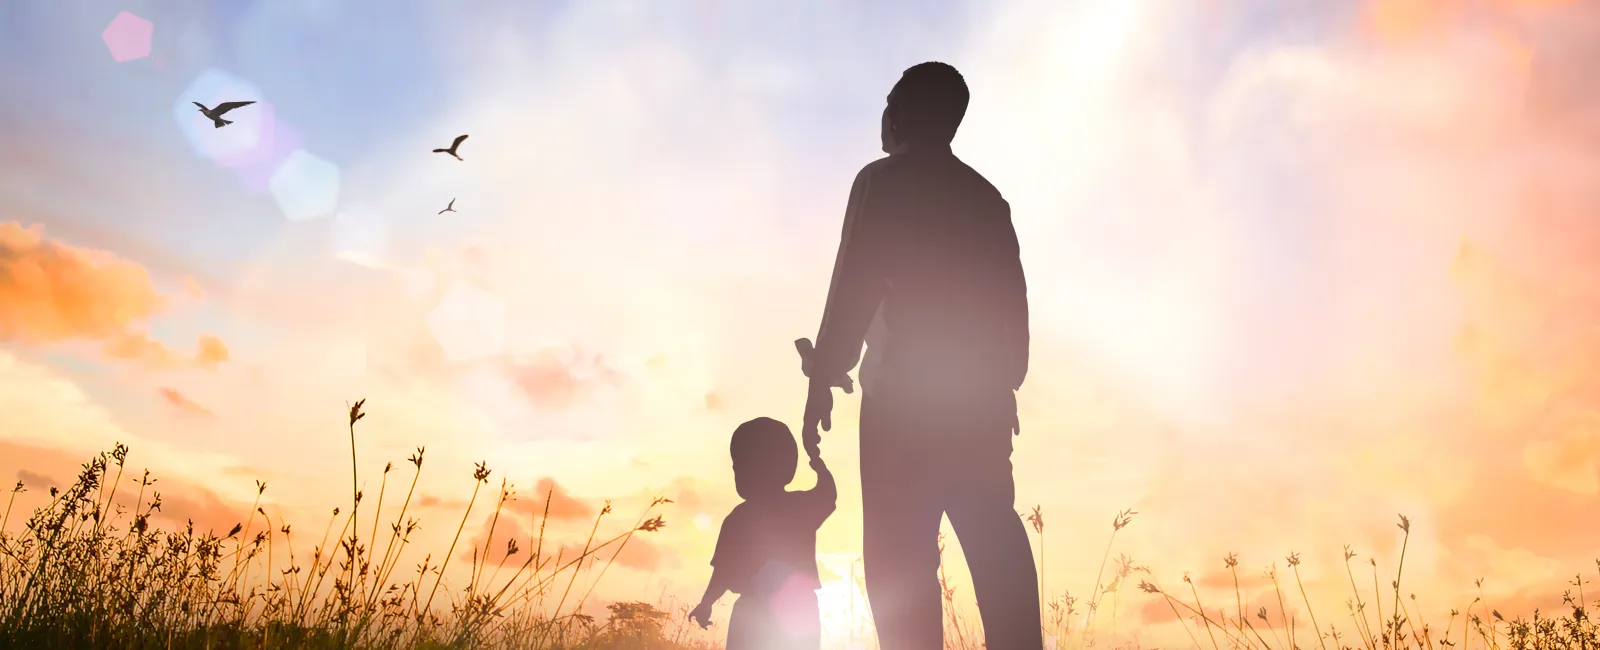 a man and a child walking in a field with a sunset